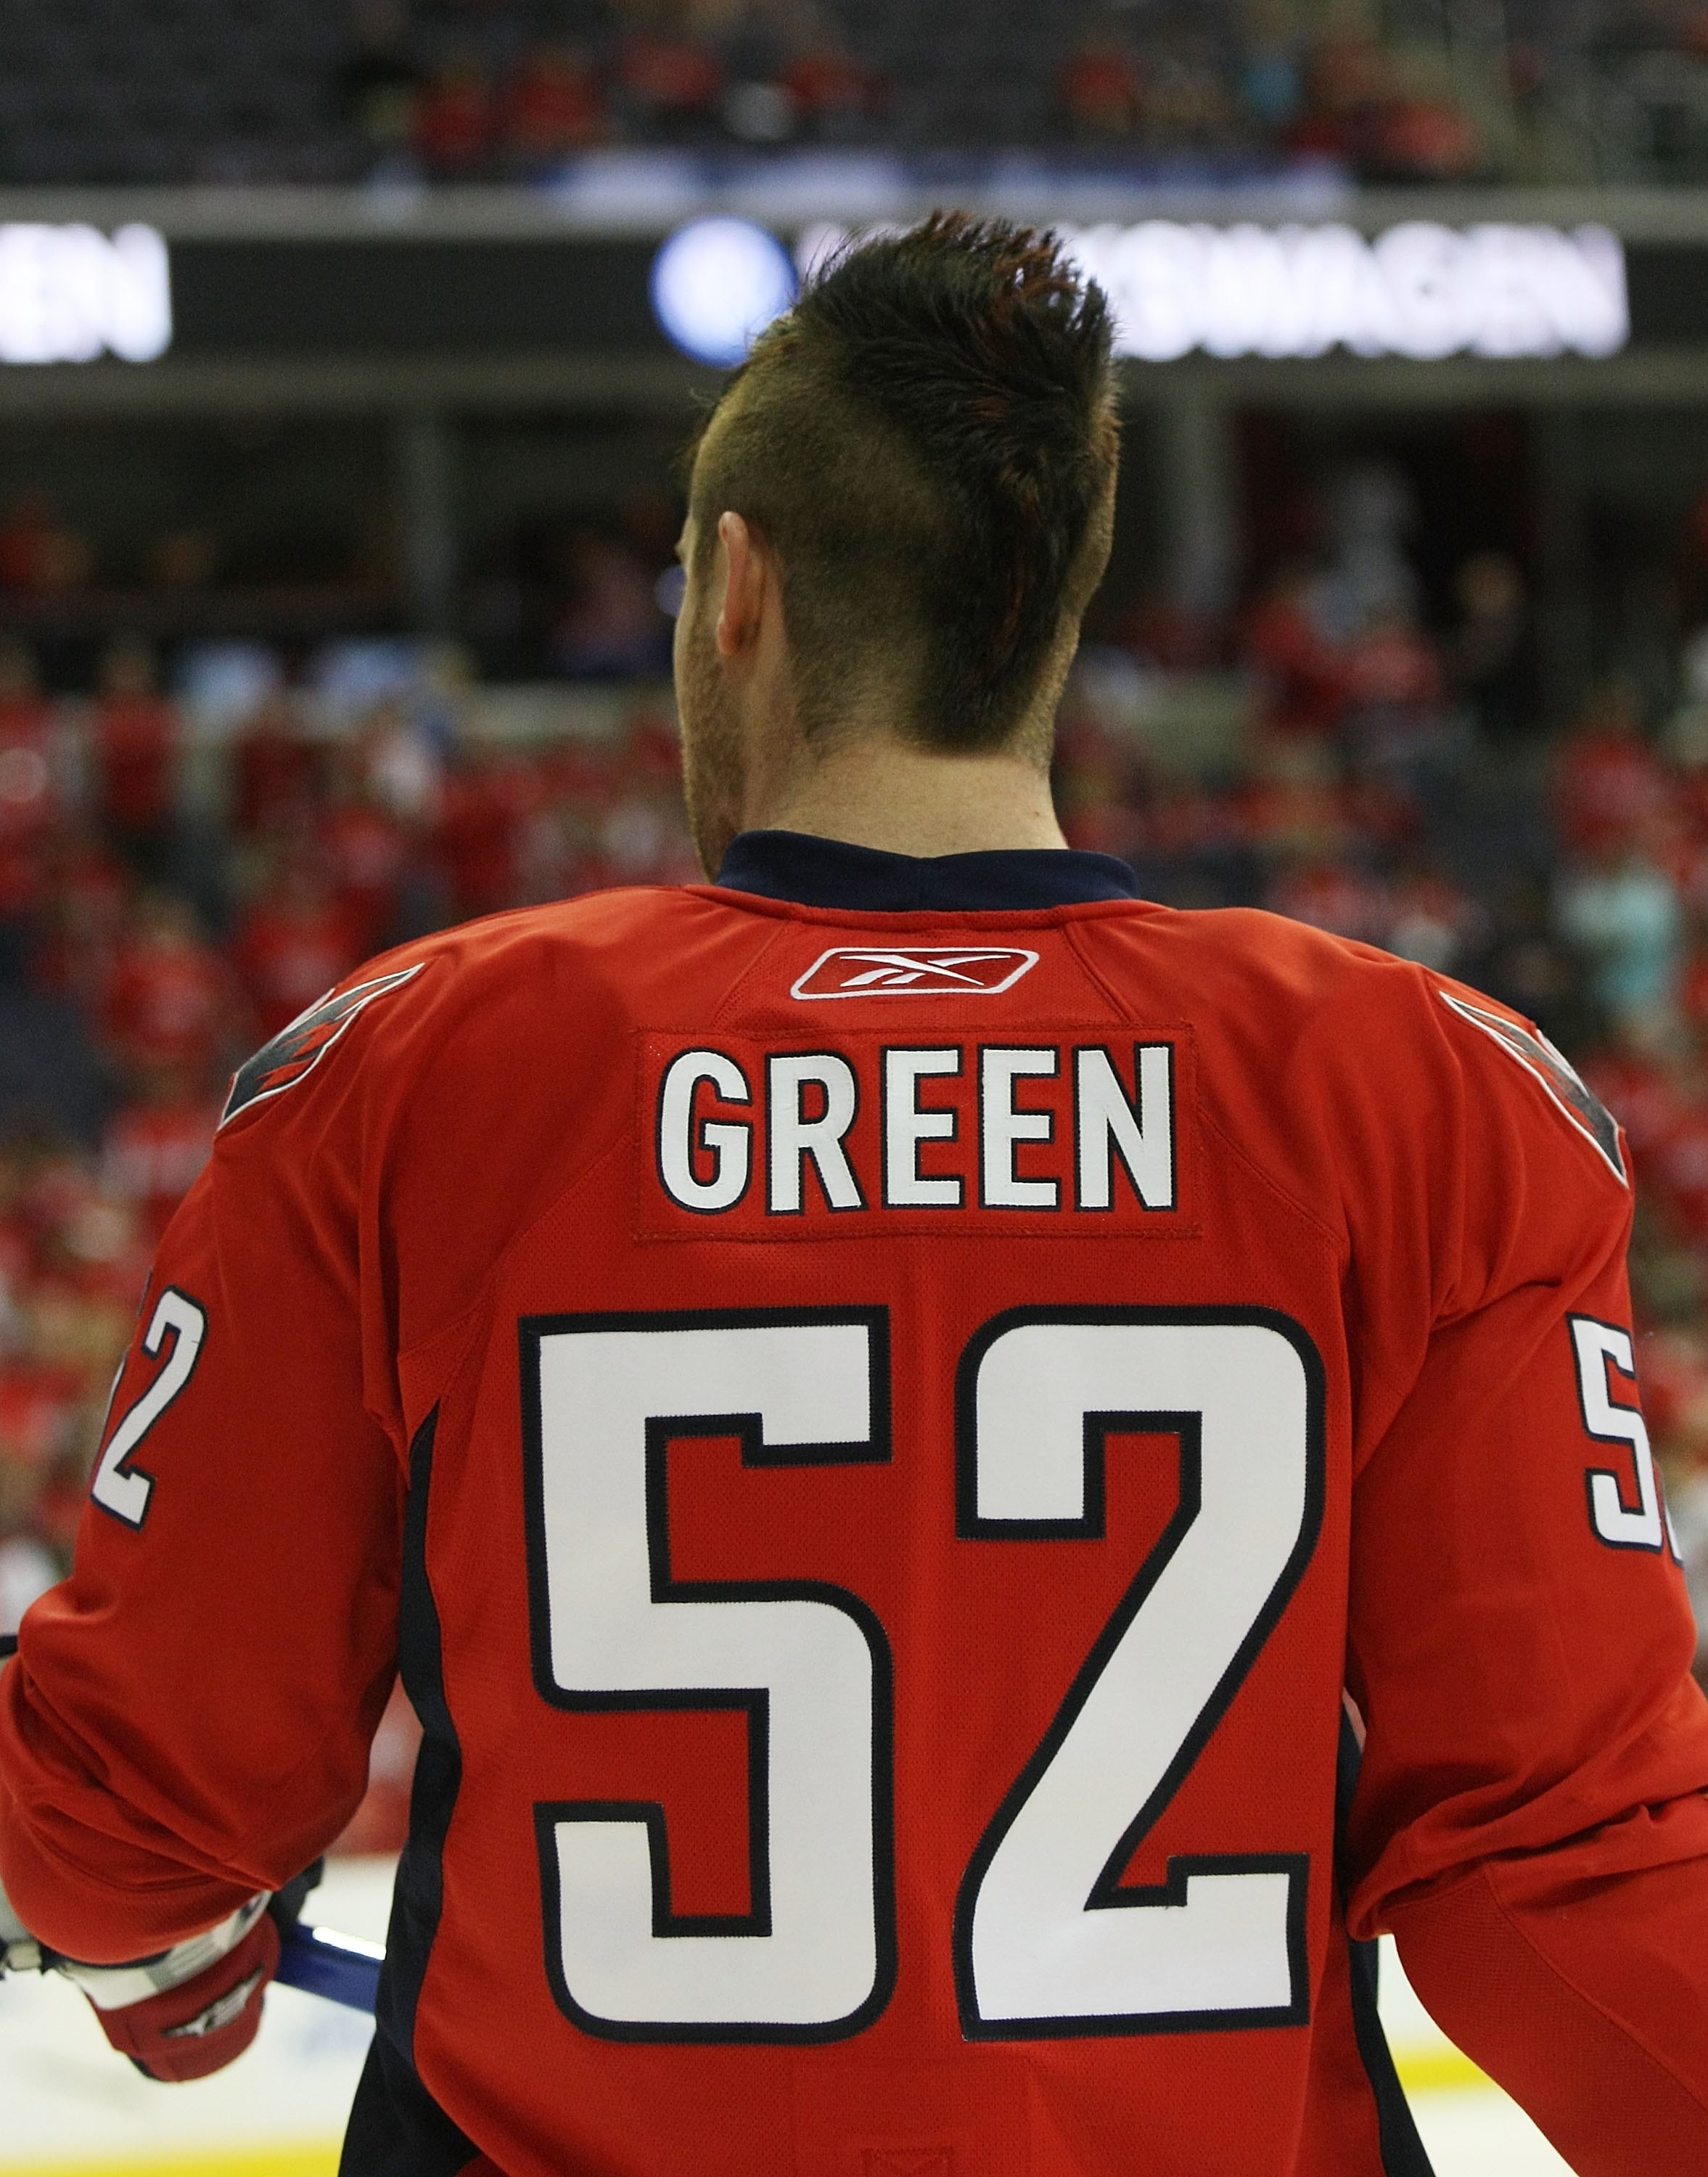 NHL profile photo on Washington Capitals' Mike Green during a game